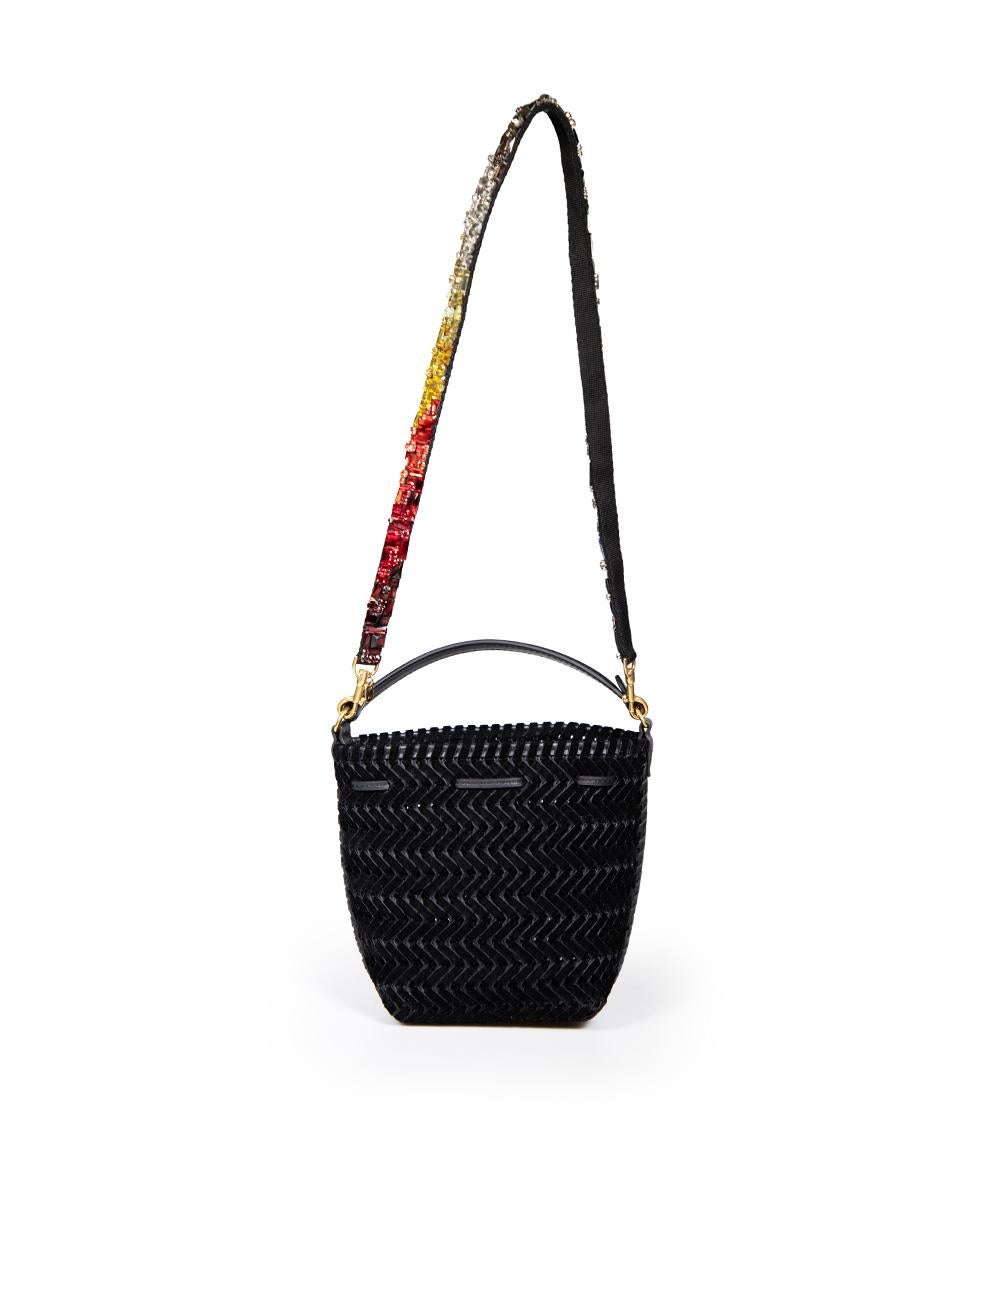 Anya Hindmarch Black Velvet Gemstone Strap Woven Bag In Good Condition For Sale In London, GB